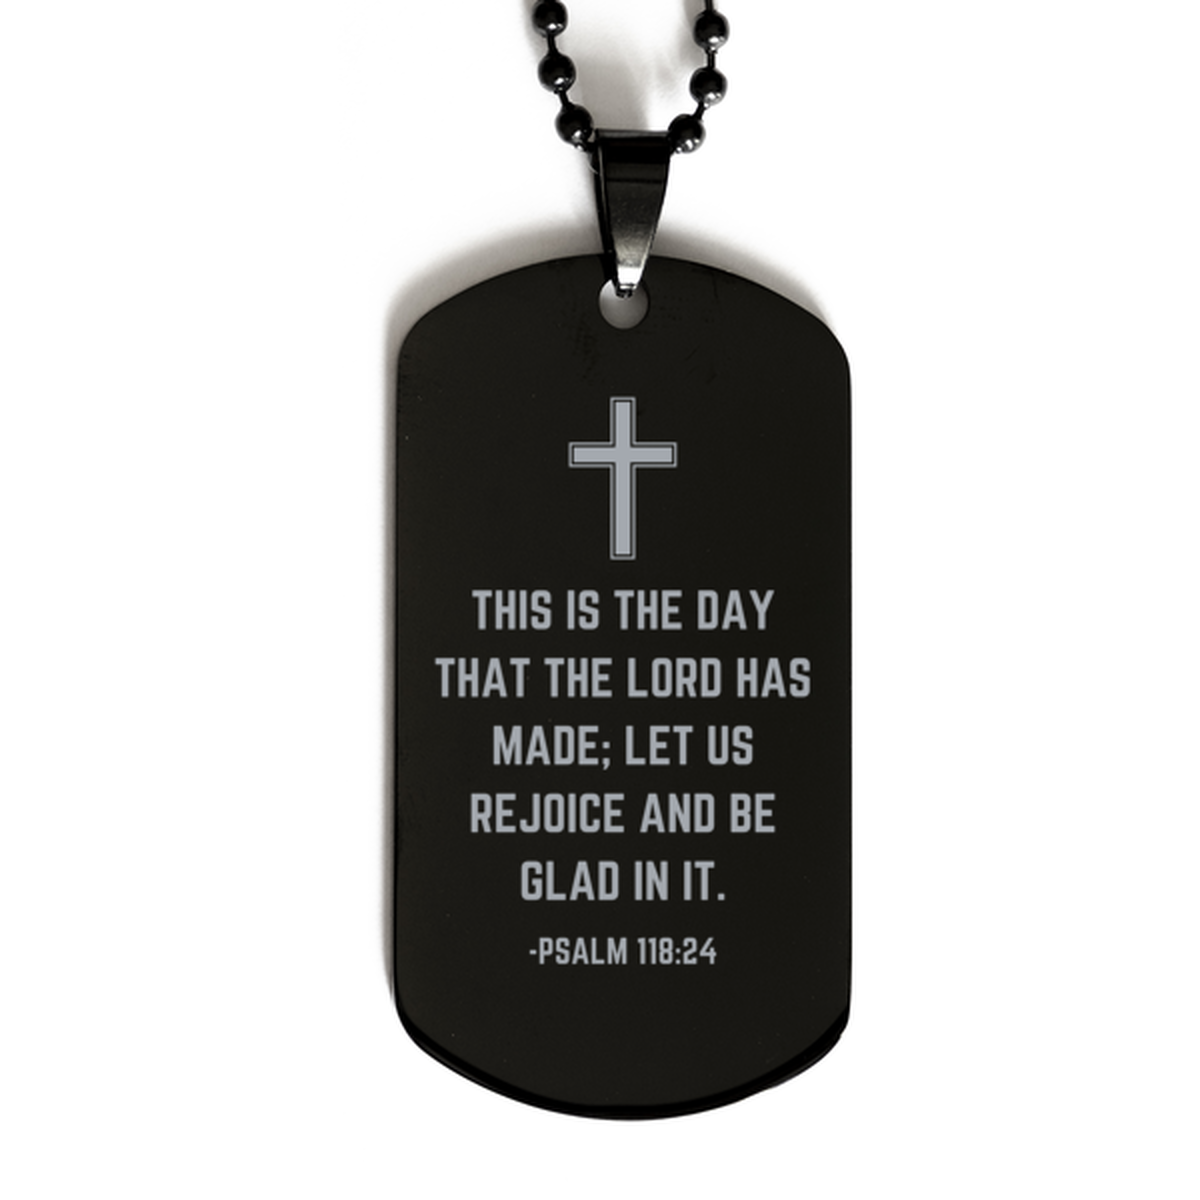 Baptism Gifts For Teenage Boys Girls, Christian Bible Verse Black Dog Tag, This is the day that the lord has made, Confirmation Gifts, Bible Verse Necklace for Son, Godson, Grandson, Nephew